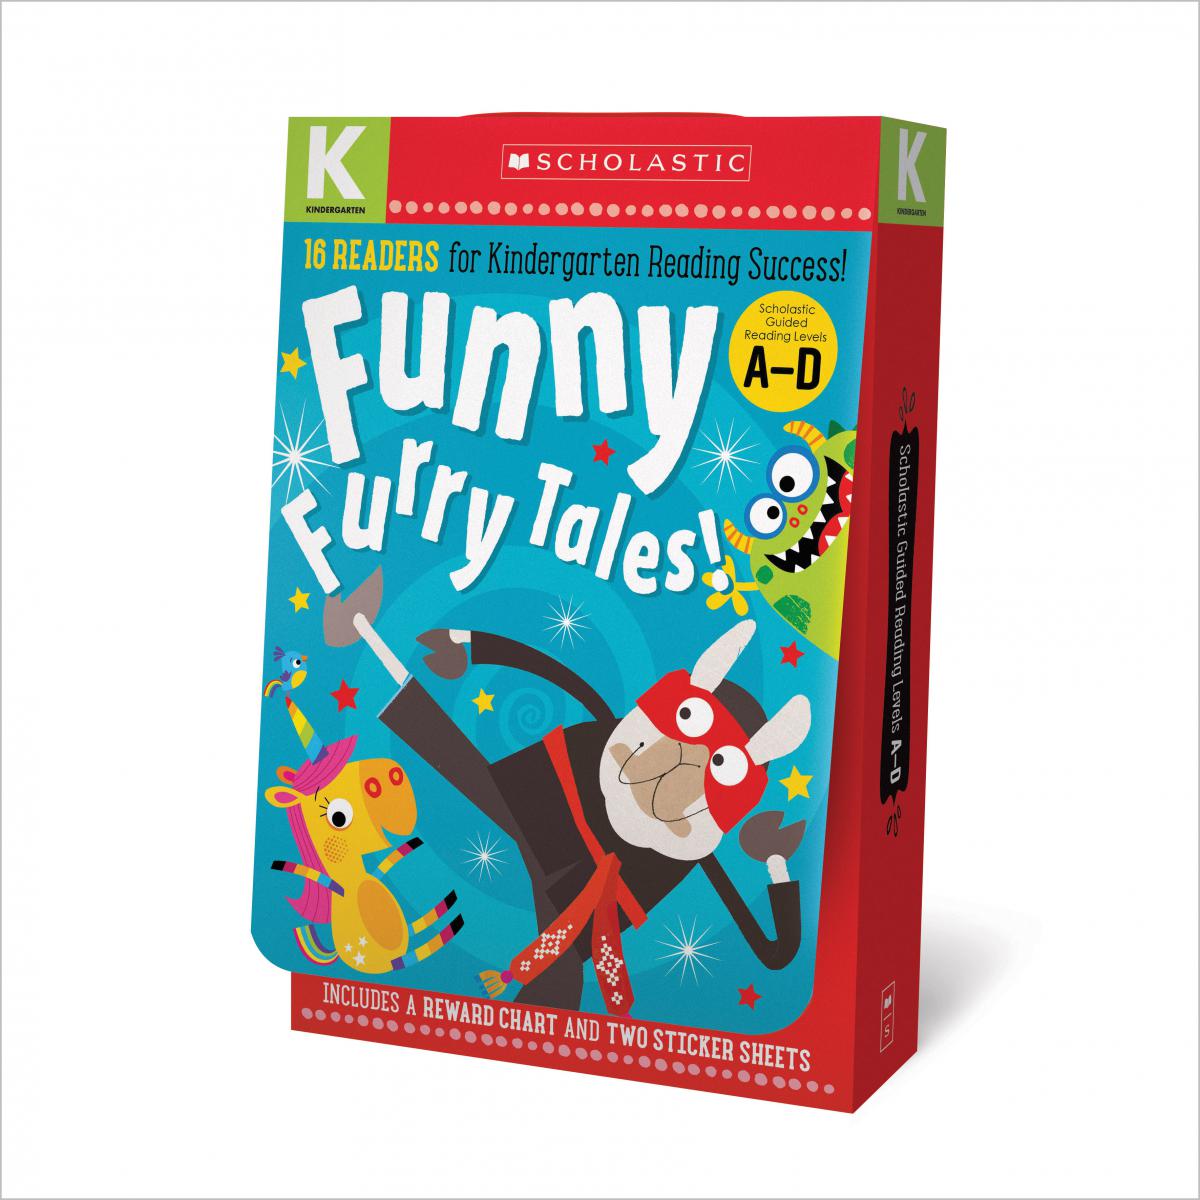 Funny Furry Tales A-D Kindergarten Reader Box Set: Scholastic Early Learners (Guided Reader) | 